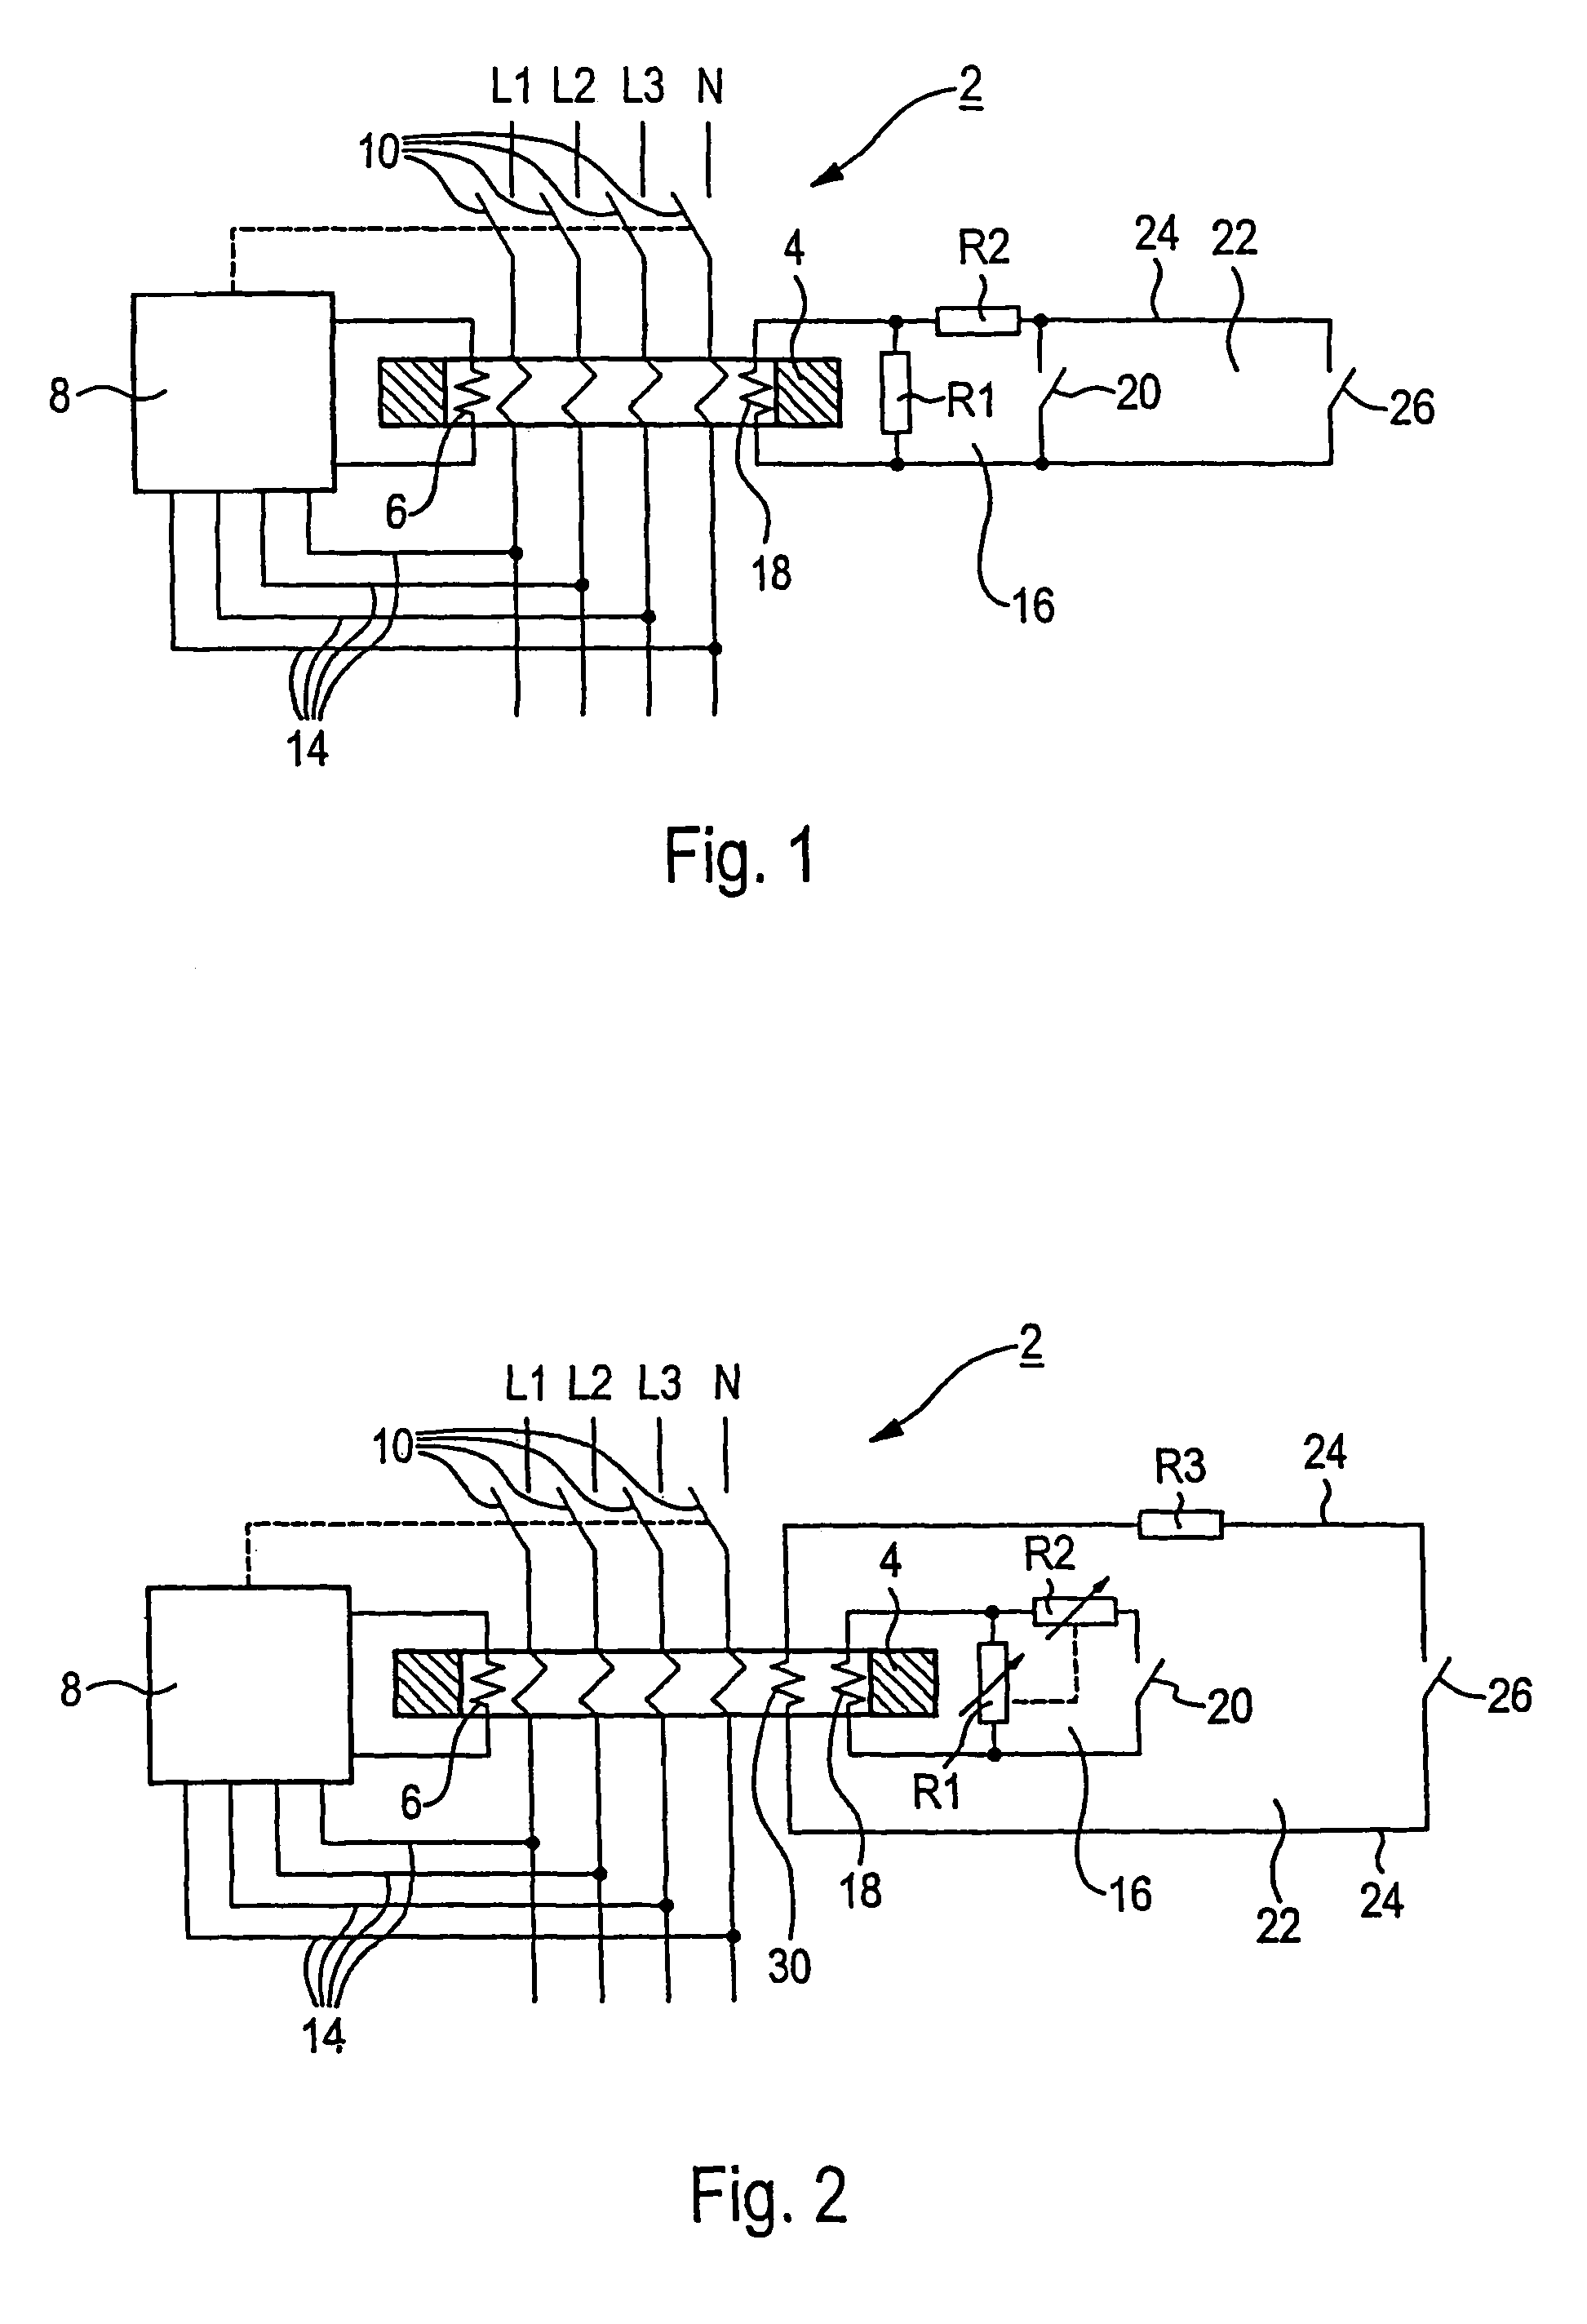 Residual-current circuit breaker and a method for testing the reliability performance of a residual-current circuit breaker